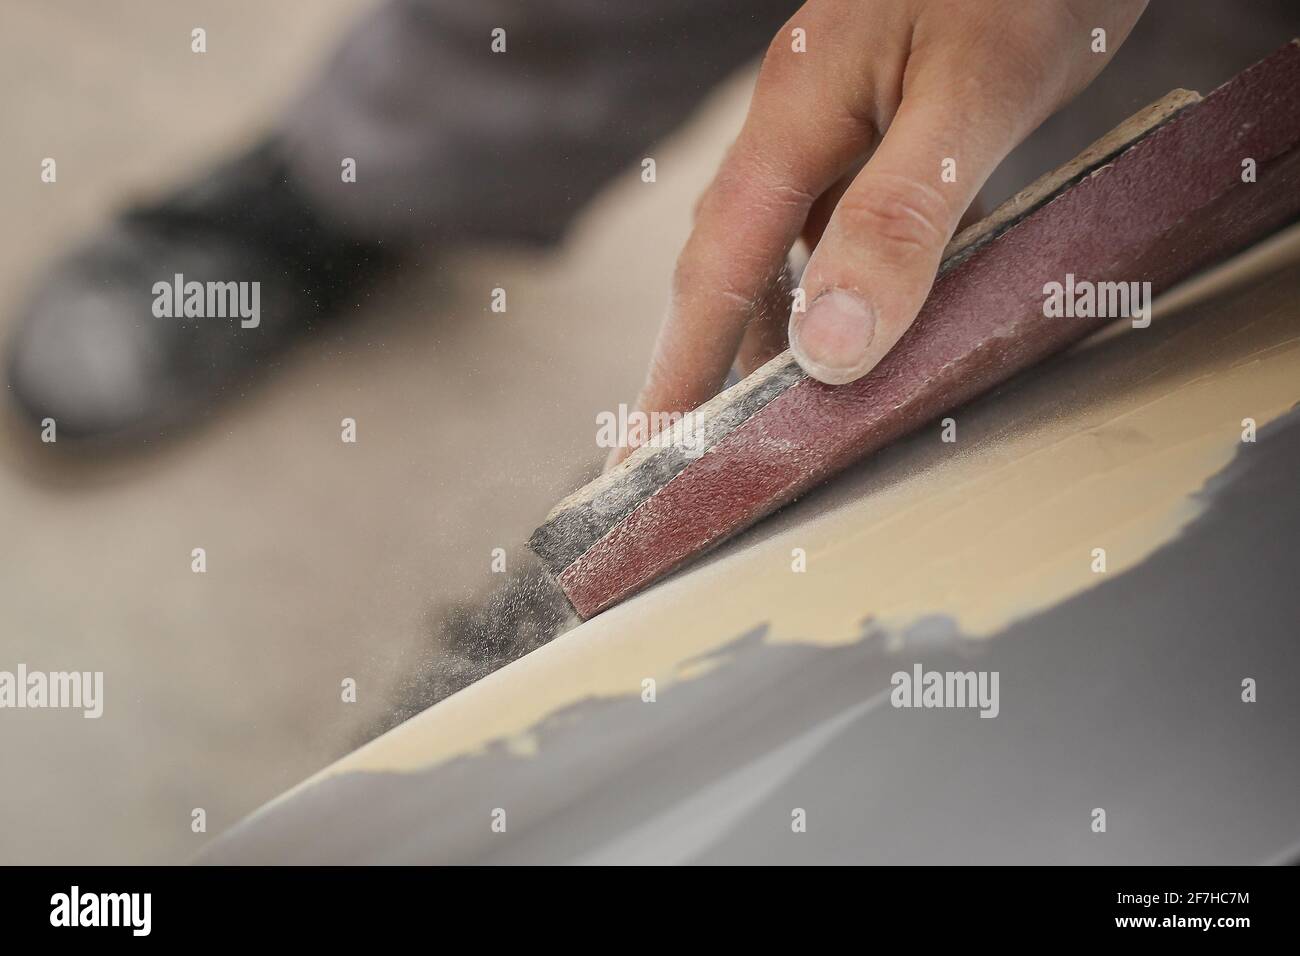 A hand of a man is seen sanding an old vintage car using a block of wood and brown sand grit paper. Manual dry sanding of a car in restoration, a proc Stock Photo